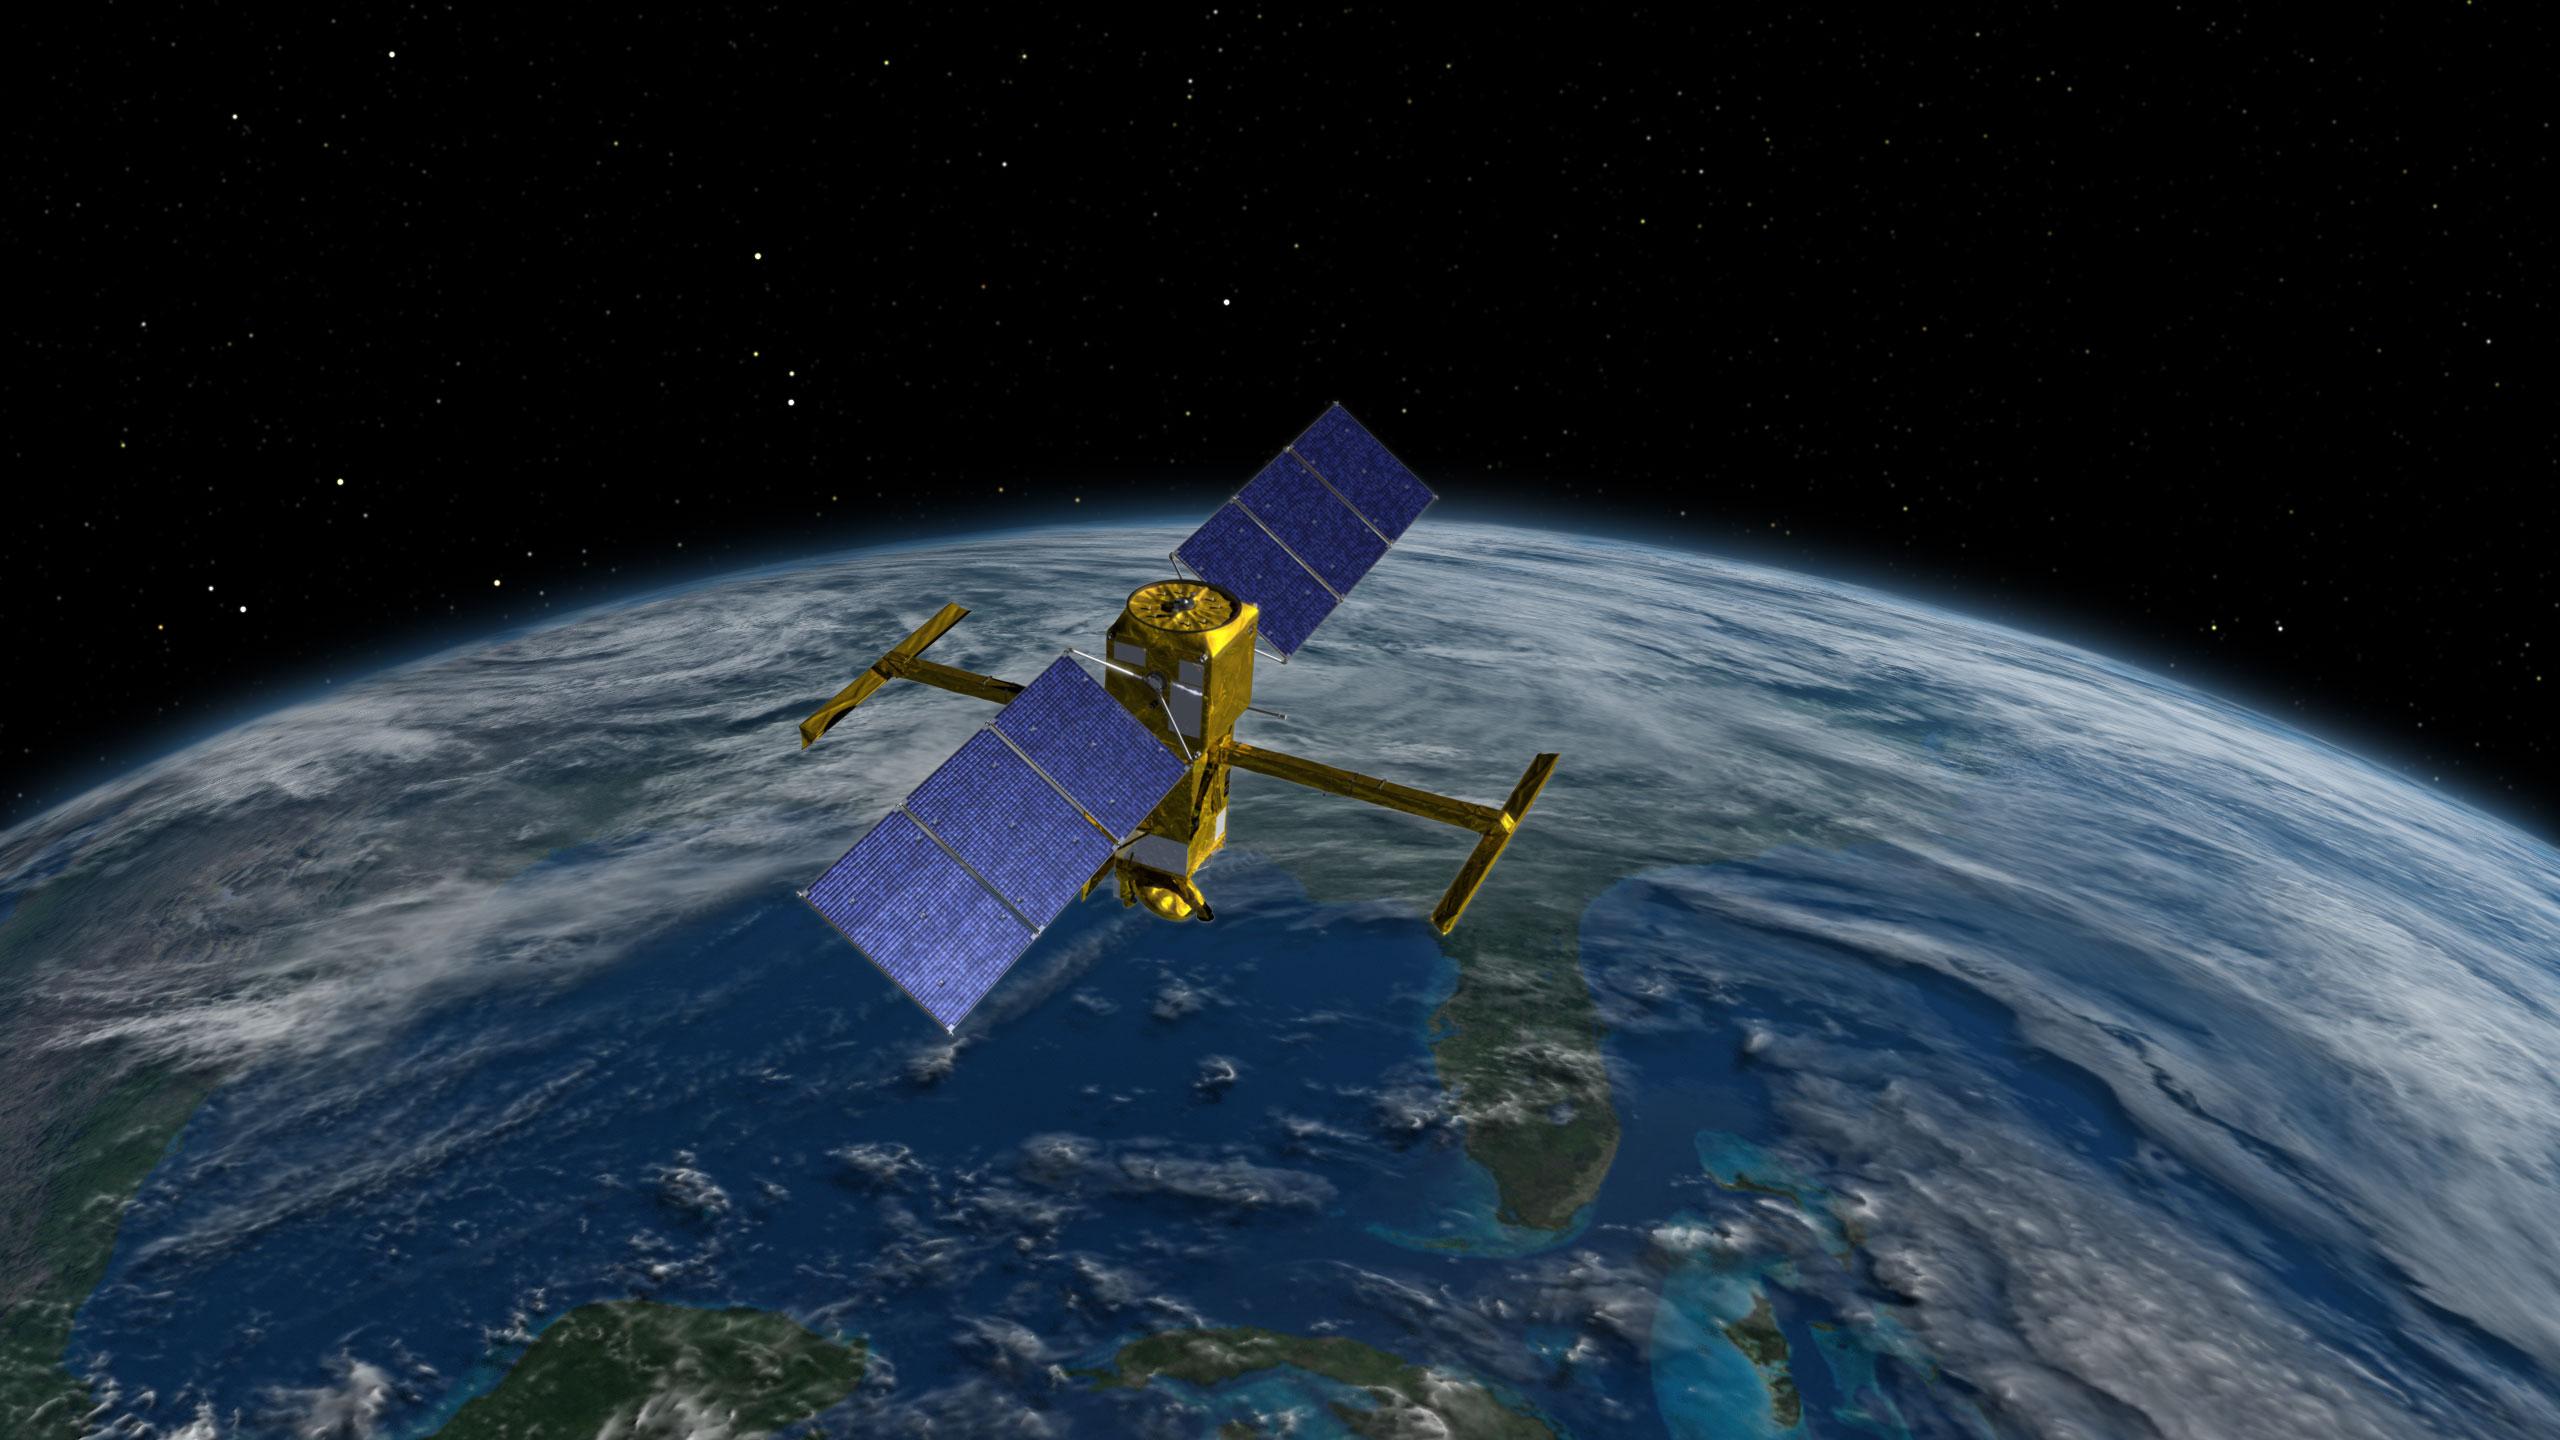 A satellite over Earth with space as a background. The satellite is maily gold colored with two box structures. From the top gold box there are three rectangular blue solar panels that extend from each side. From the middle there are two gold colored t-shaped structures that extend out in the opposite direction from the solar panels. Together they make an x letter shape.